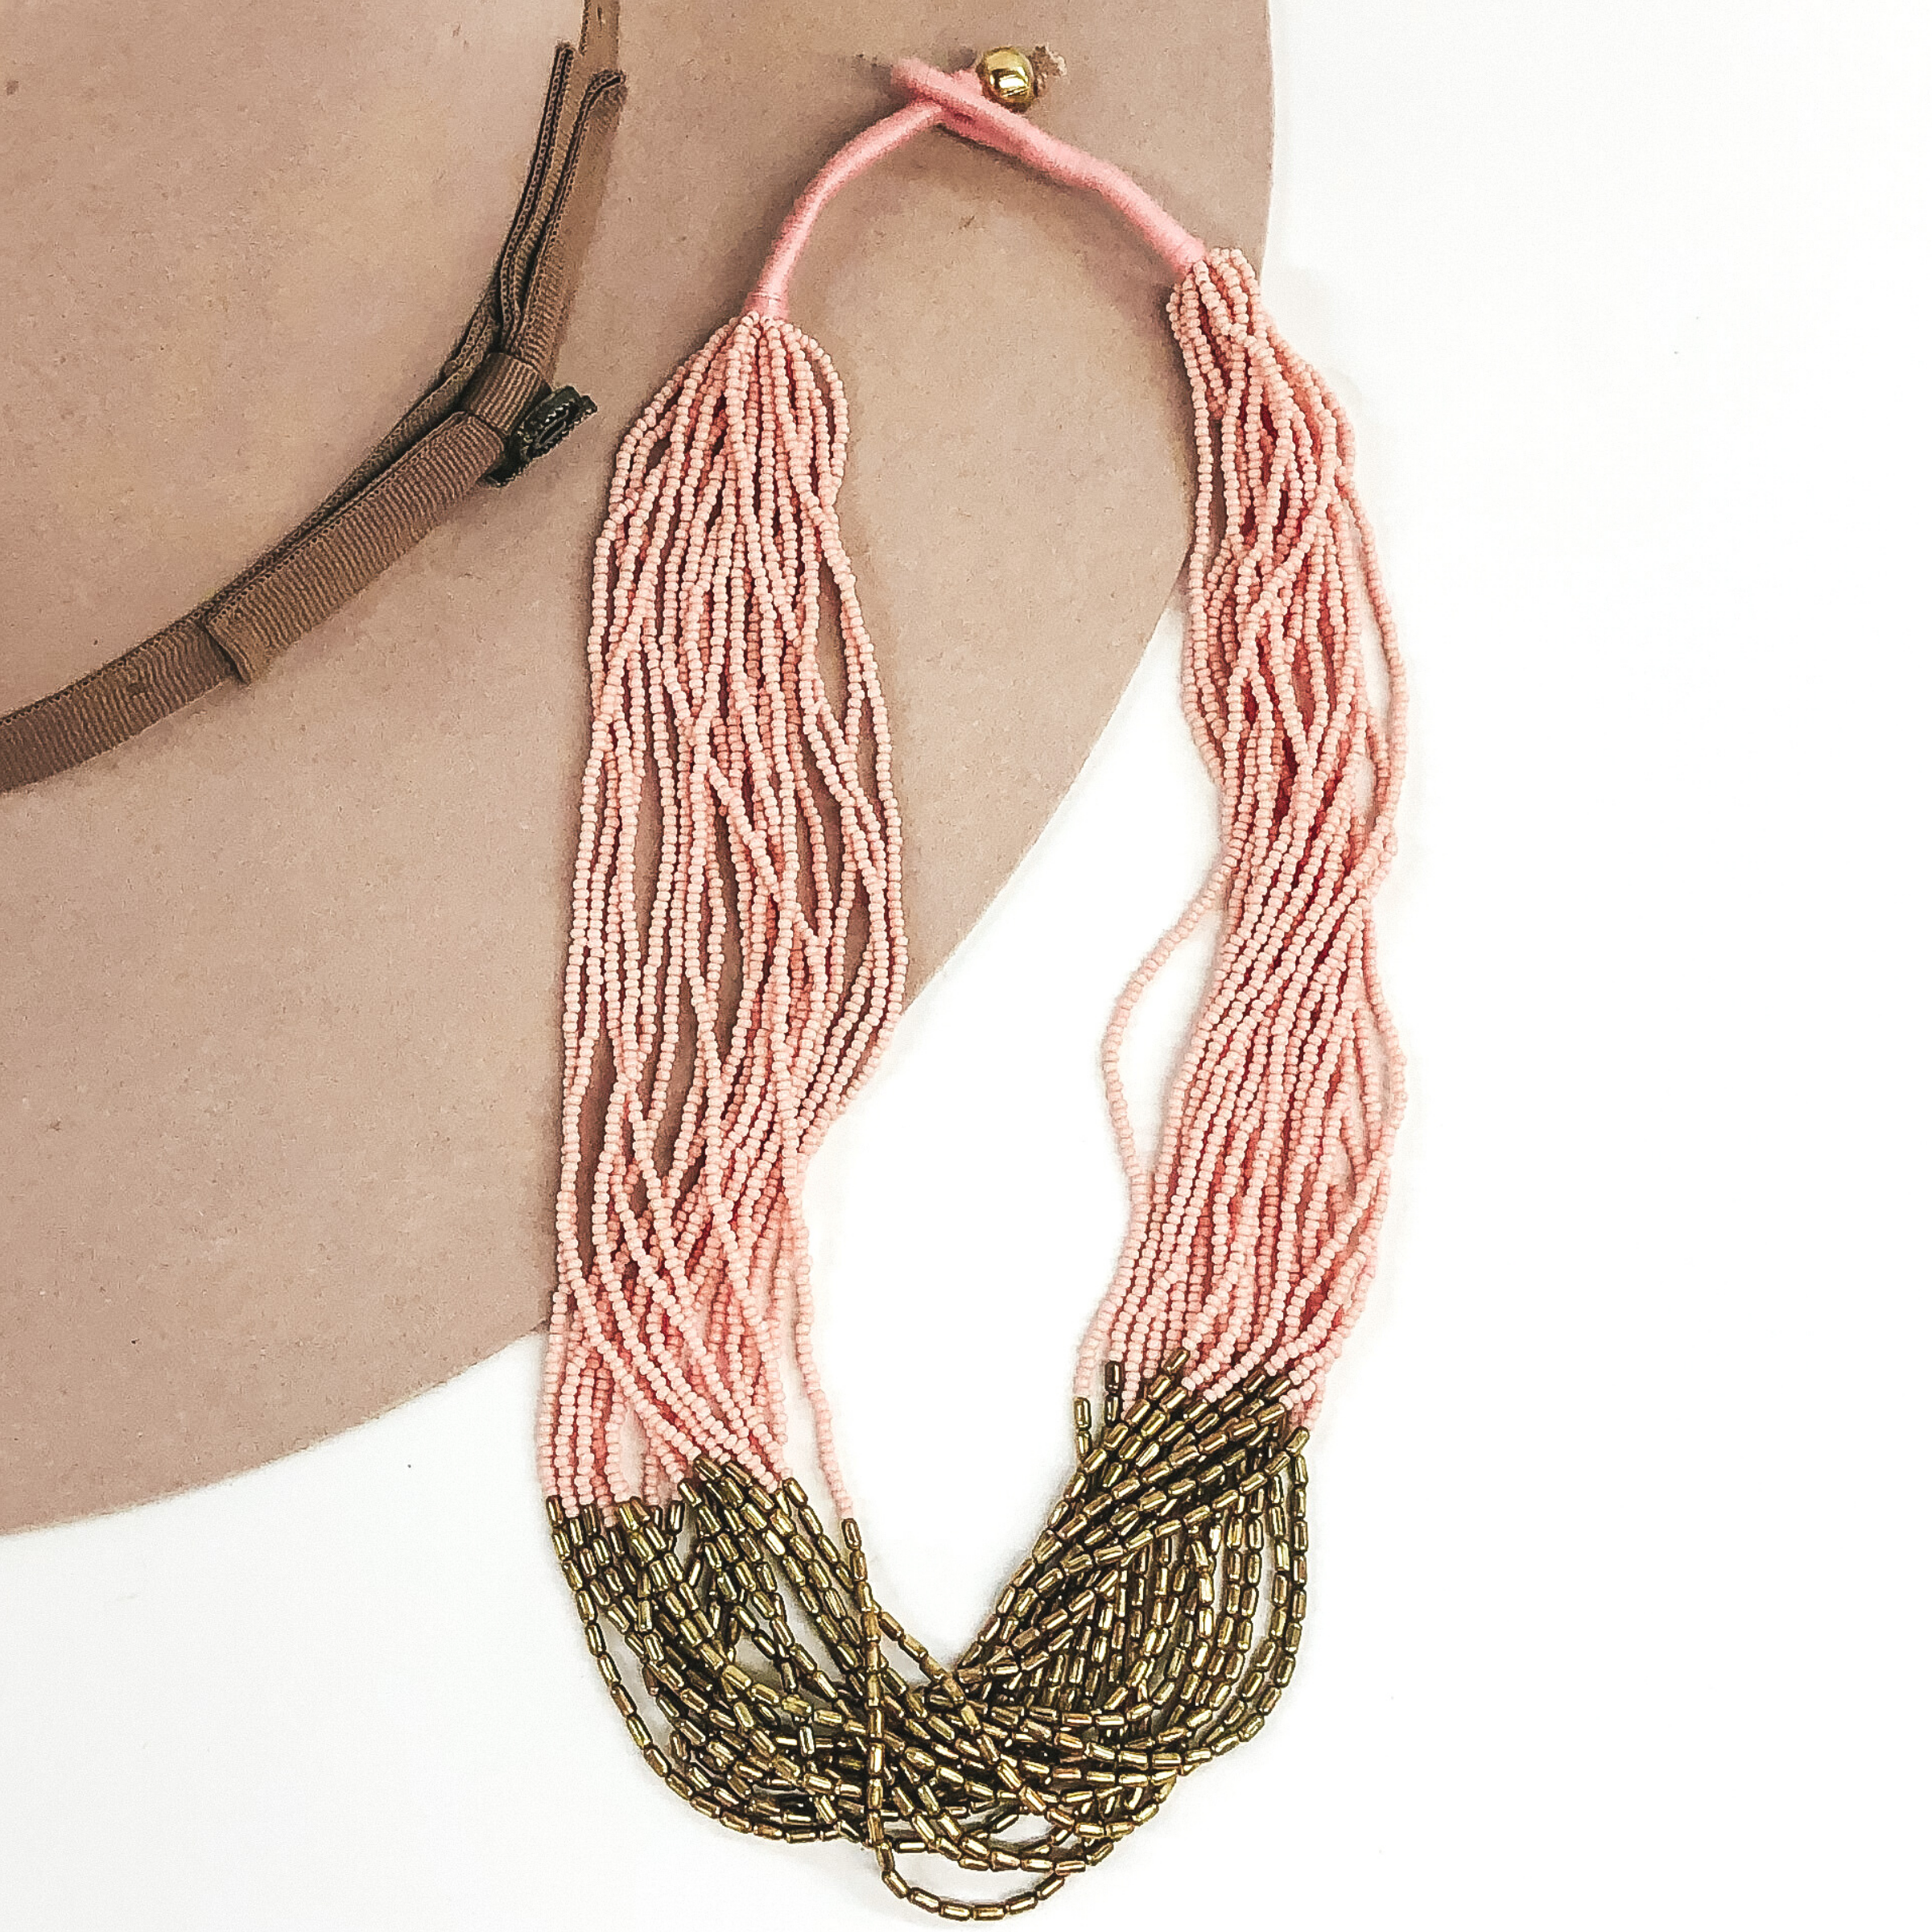 The strands on this necklace have light pink beads and gold beads in the middle of the string. There are a lot of single strings put together to make a single necklace. The necklace has a gold bead that goes through a loop to put the necklace on. This necklace is pictured laying on a beige hat on a white background.